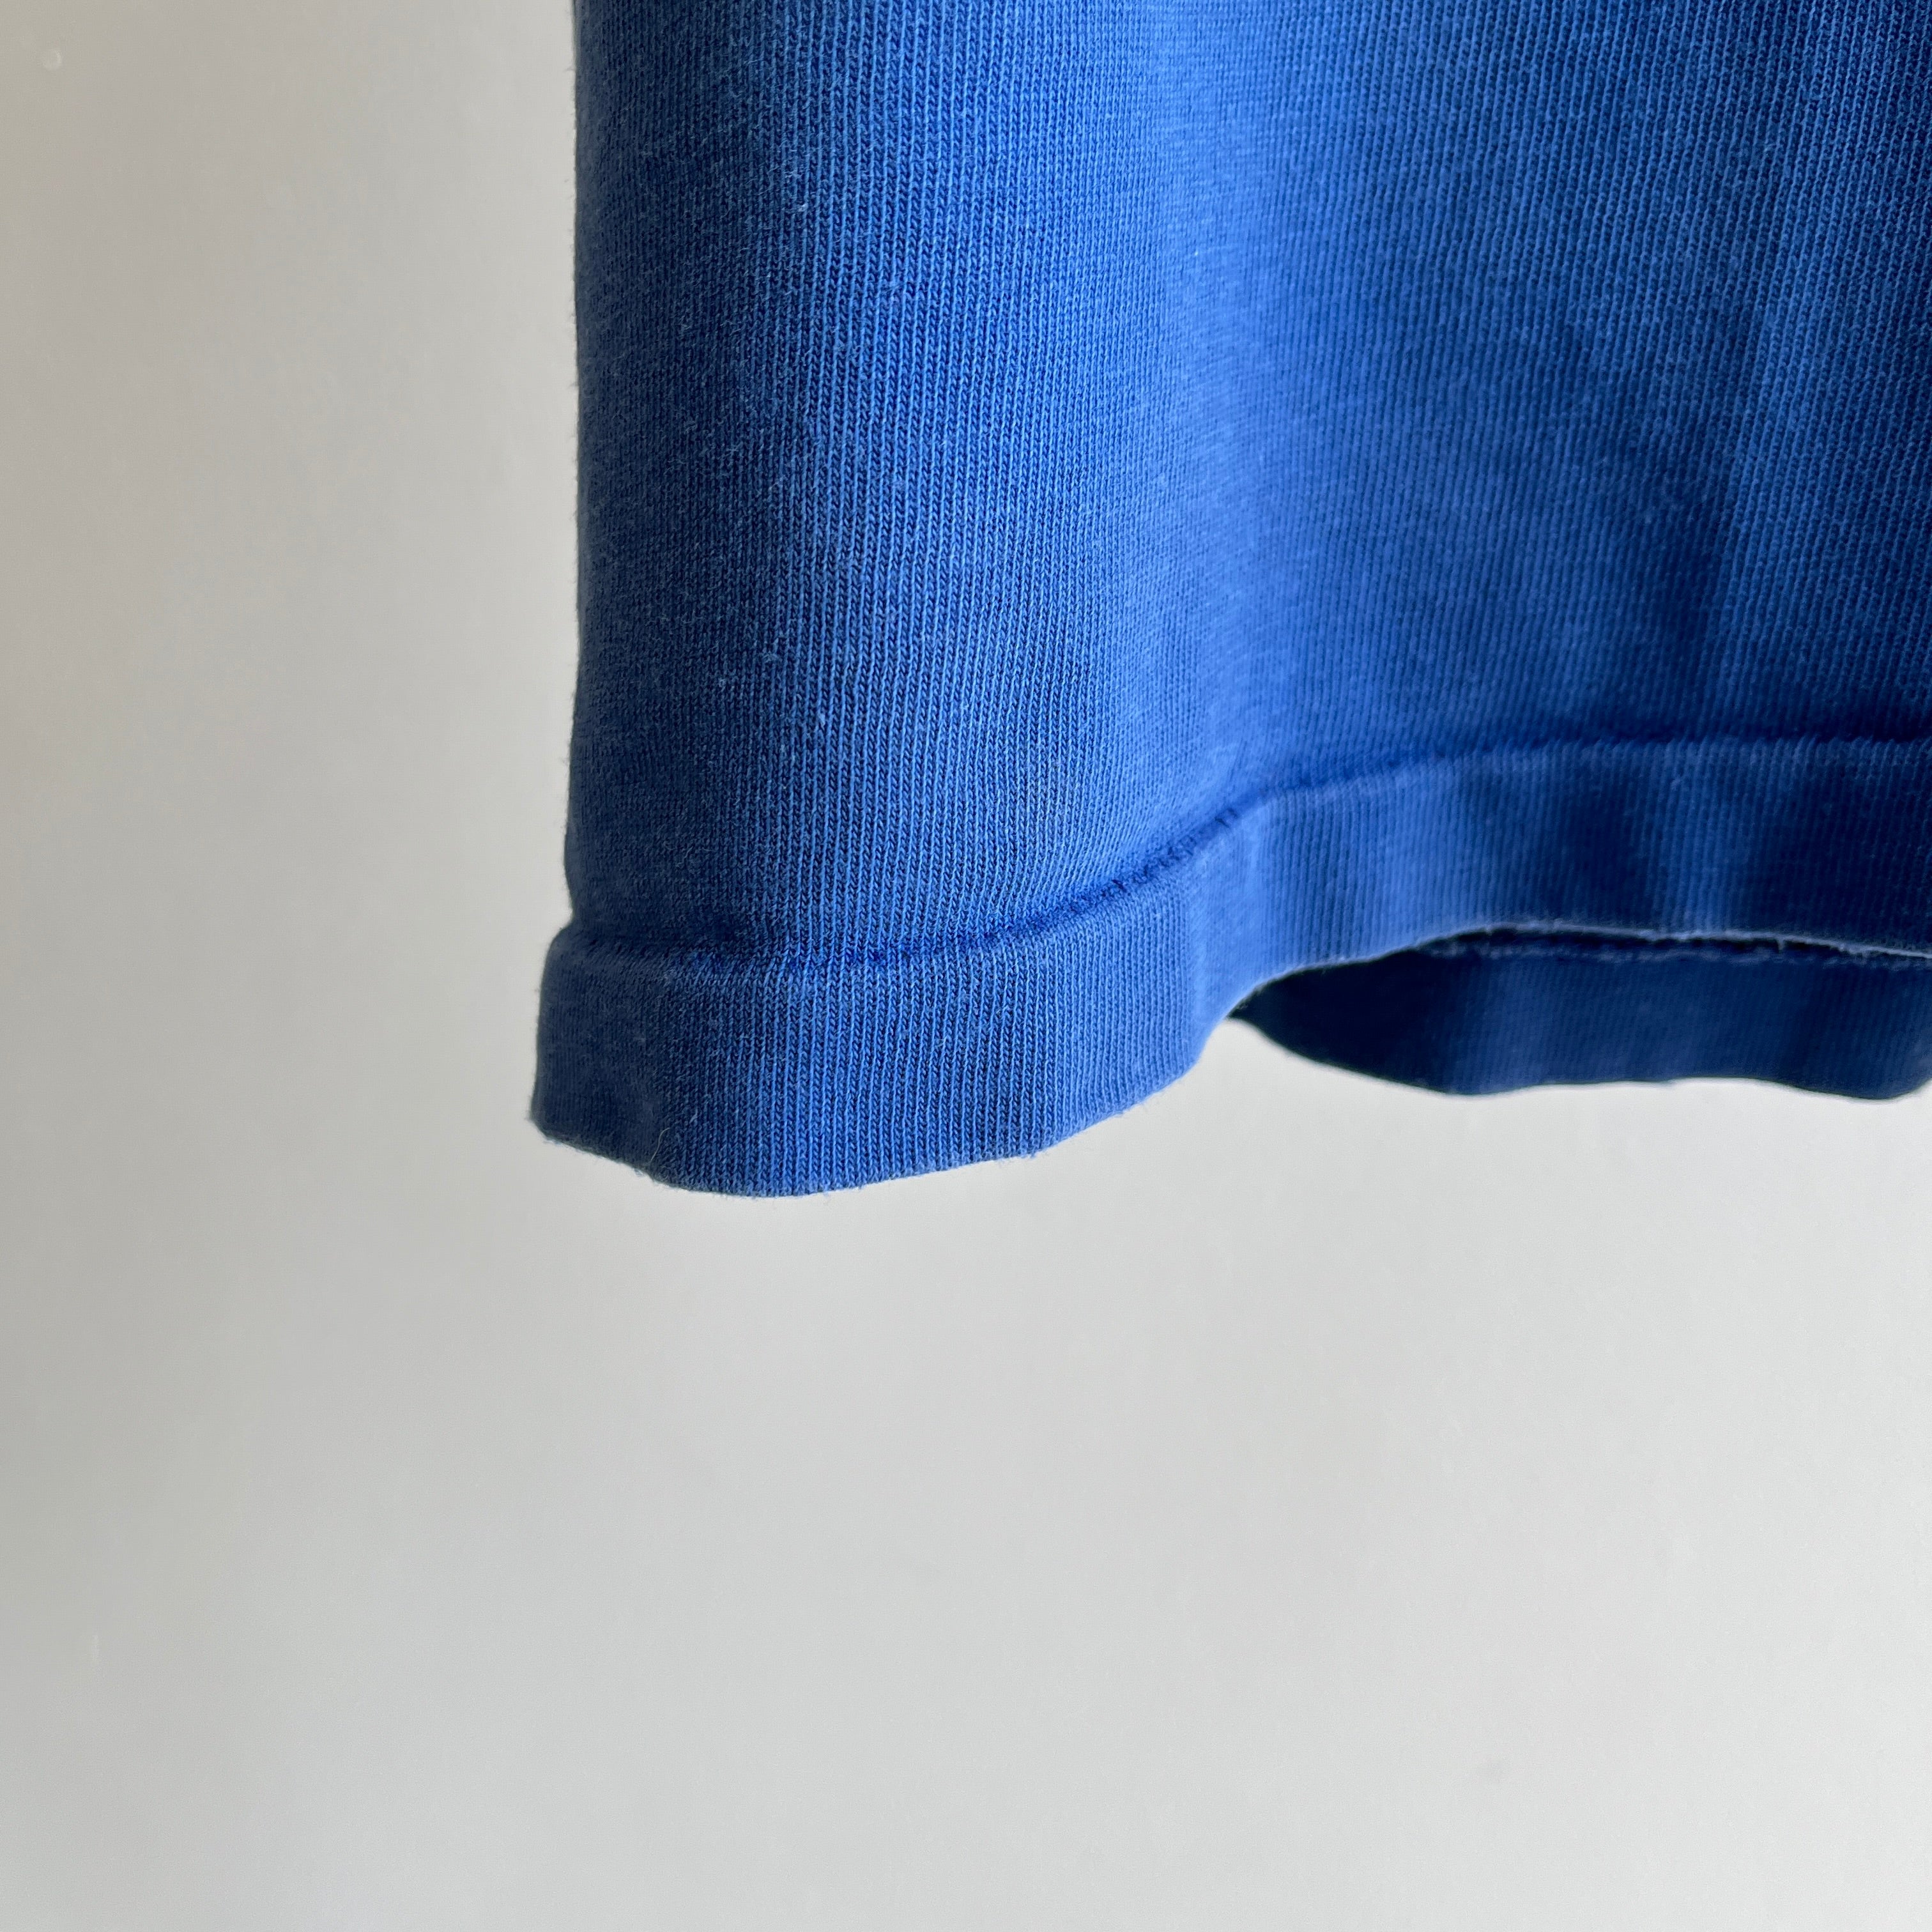 1980s Cotton Oversized (REALLY AWESOME) Heavyweight Blank Blue Pocket T-Shirt - Not. Your. Average.